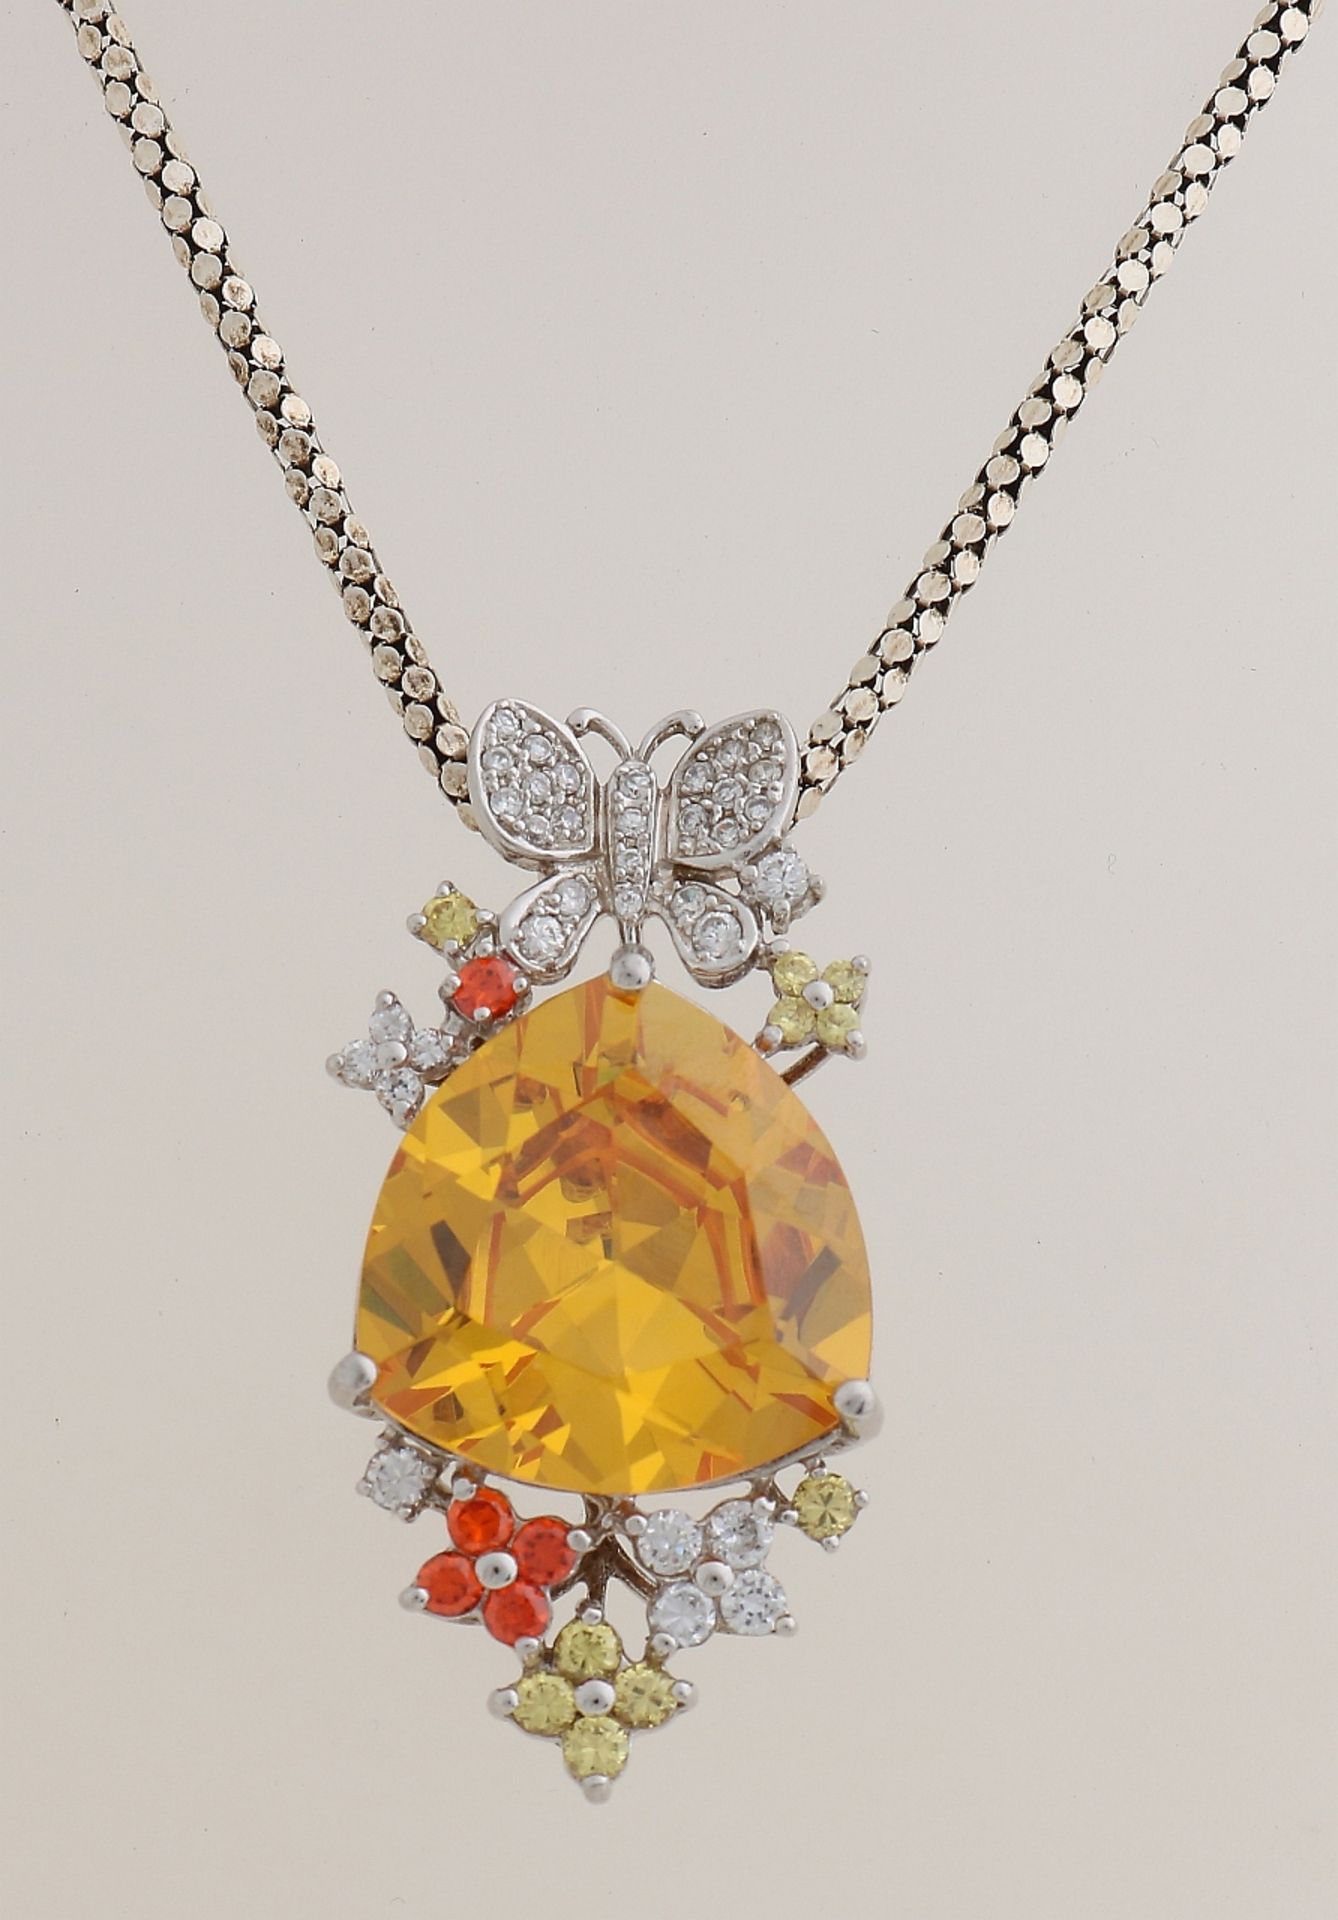 Silver necklace with pendant, yellow stone